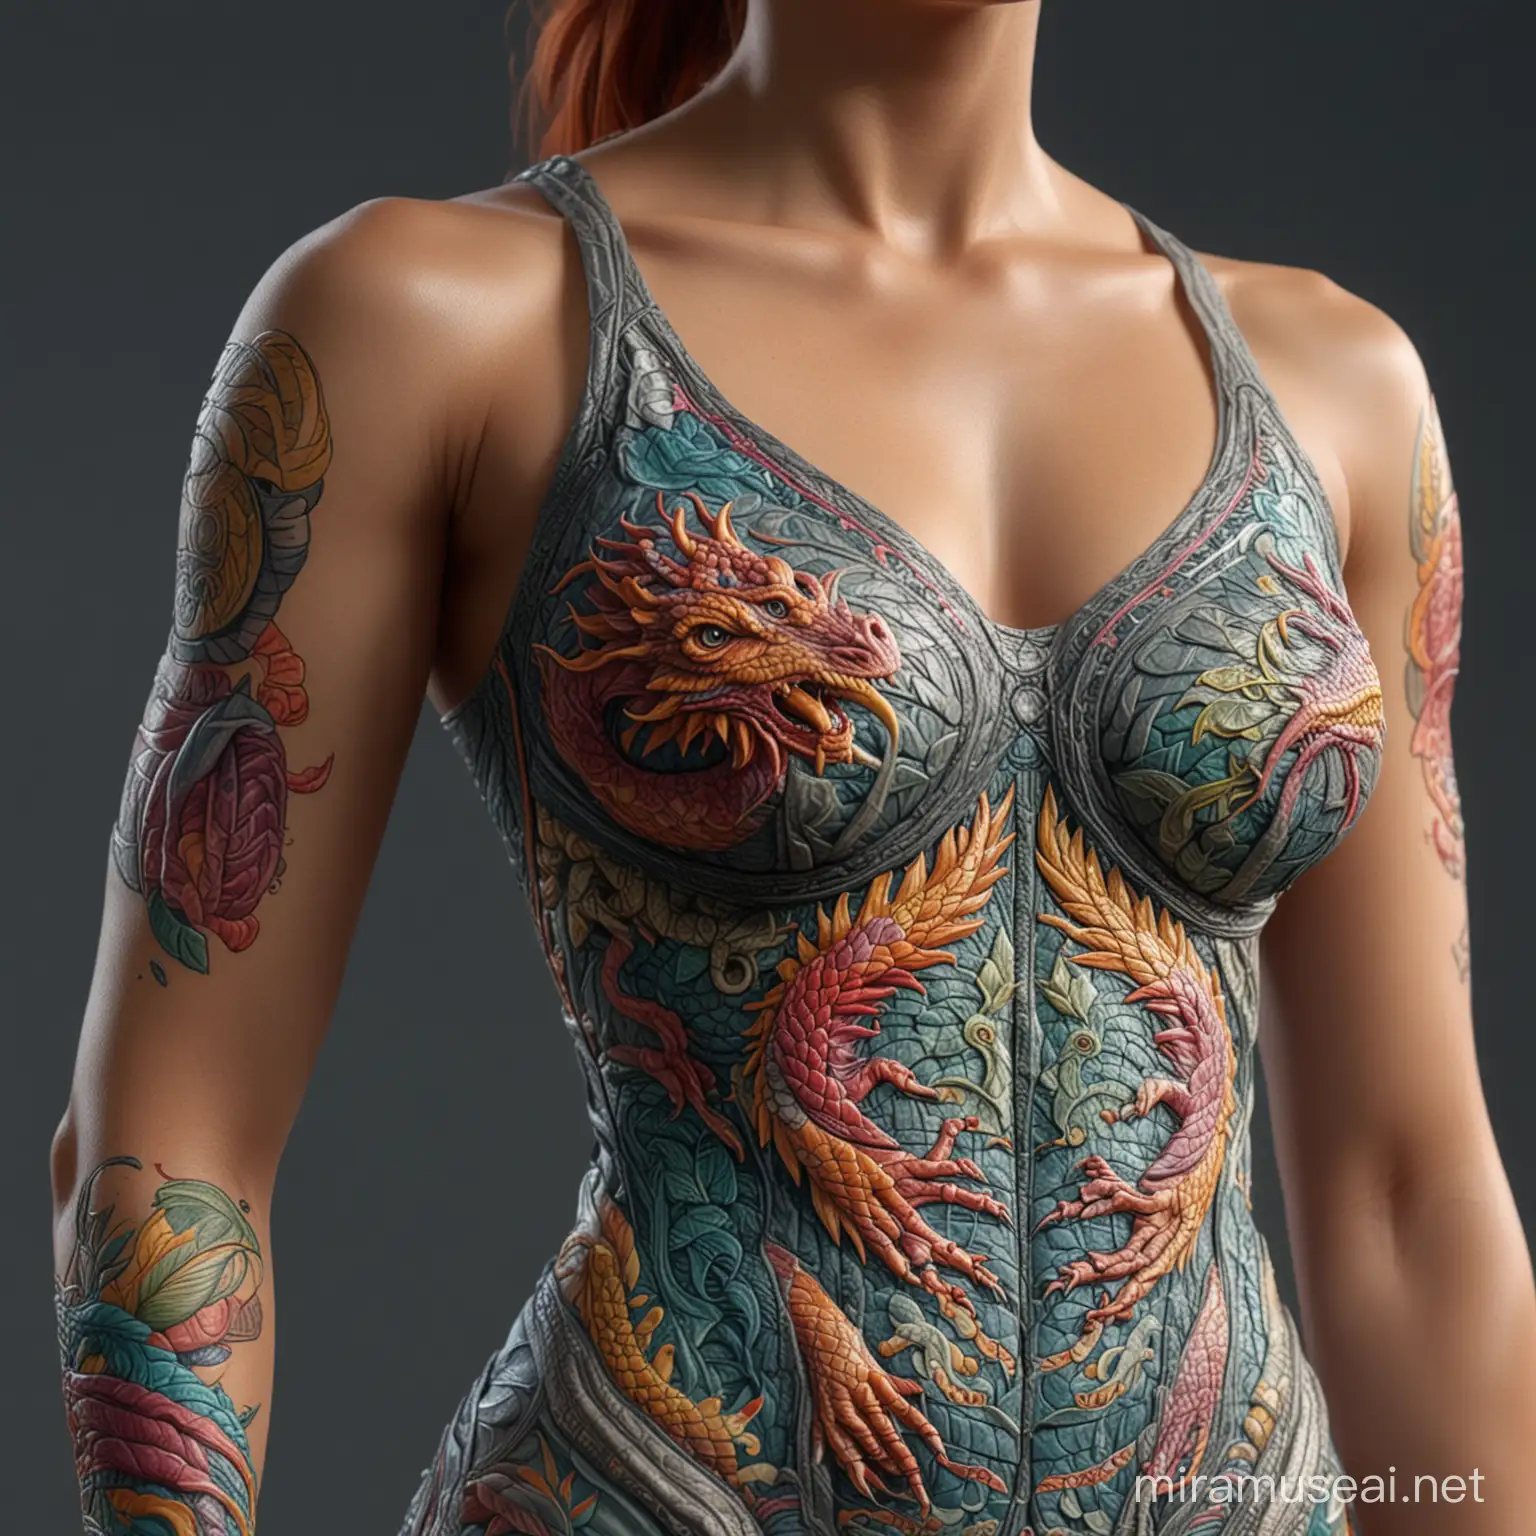 ultrarealistic high detail 4k full body long shot showing an anatomically correct female human, with colourful draconic symbols carved into arms, with a sleeveless summer dress